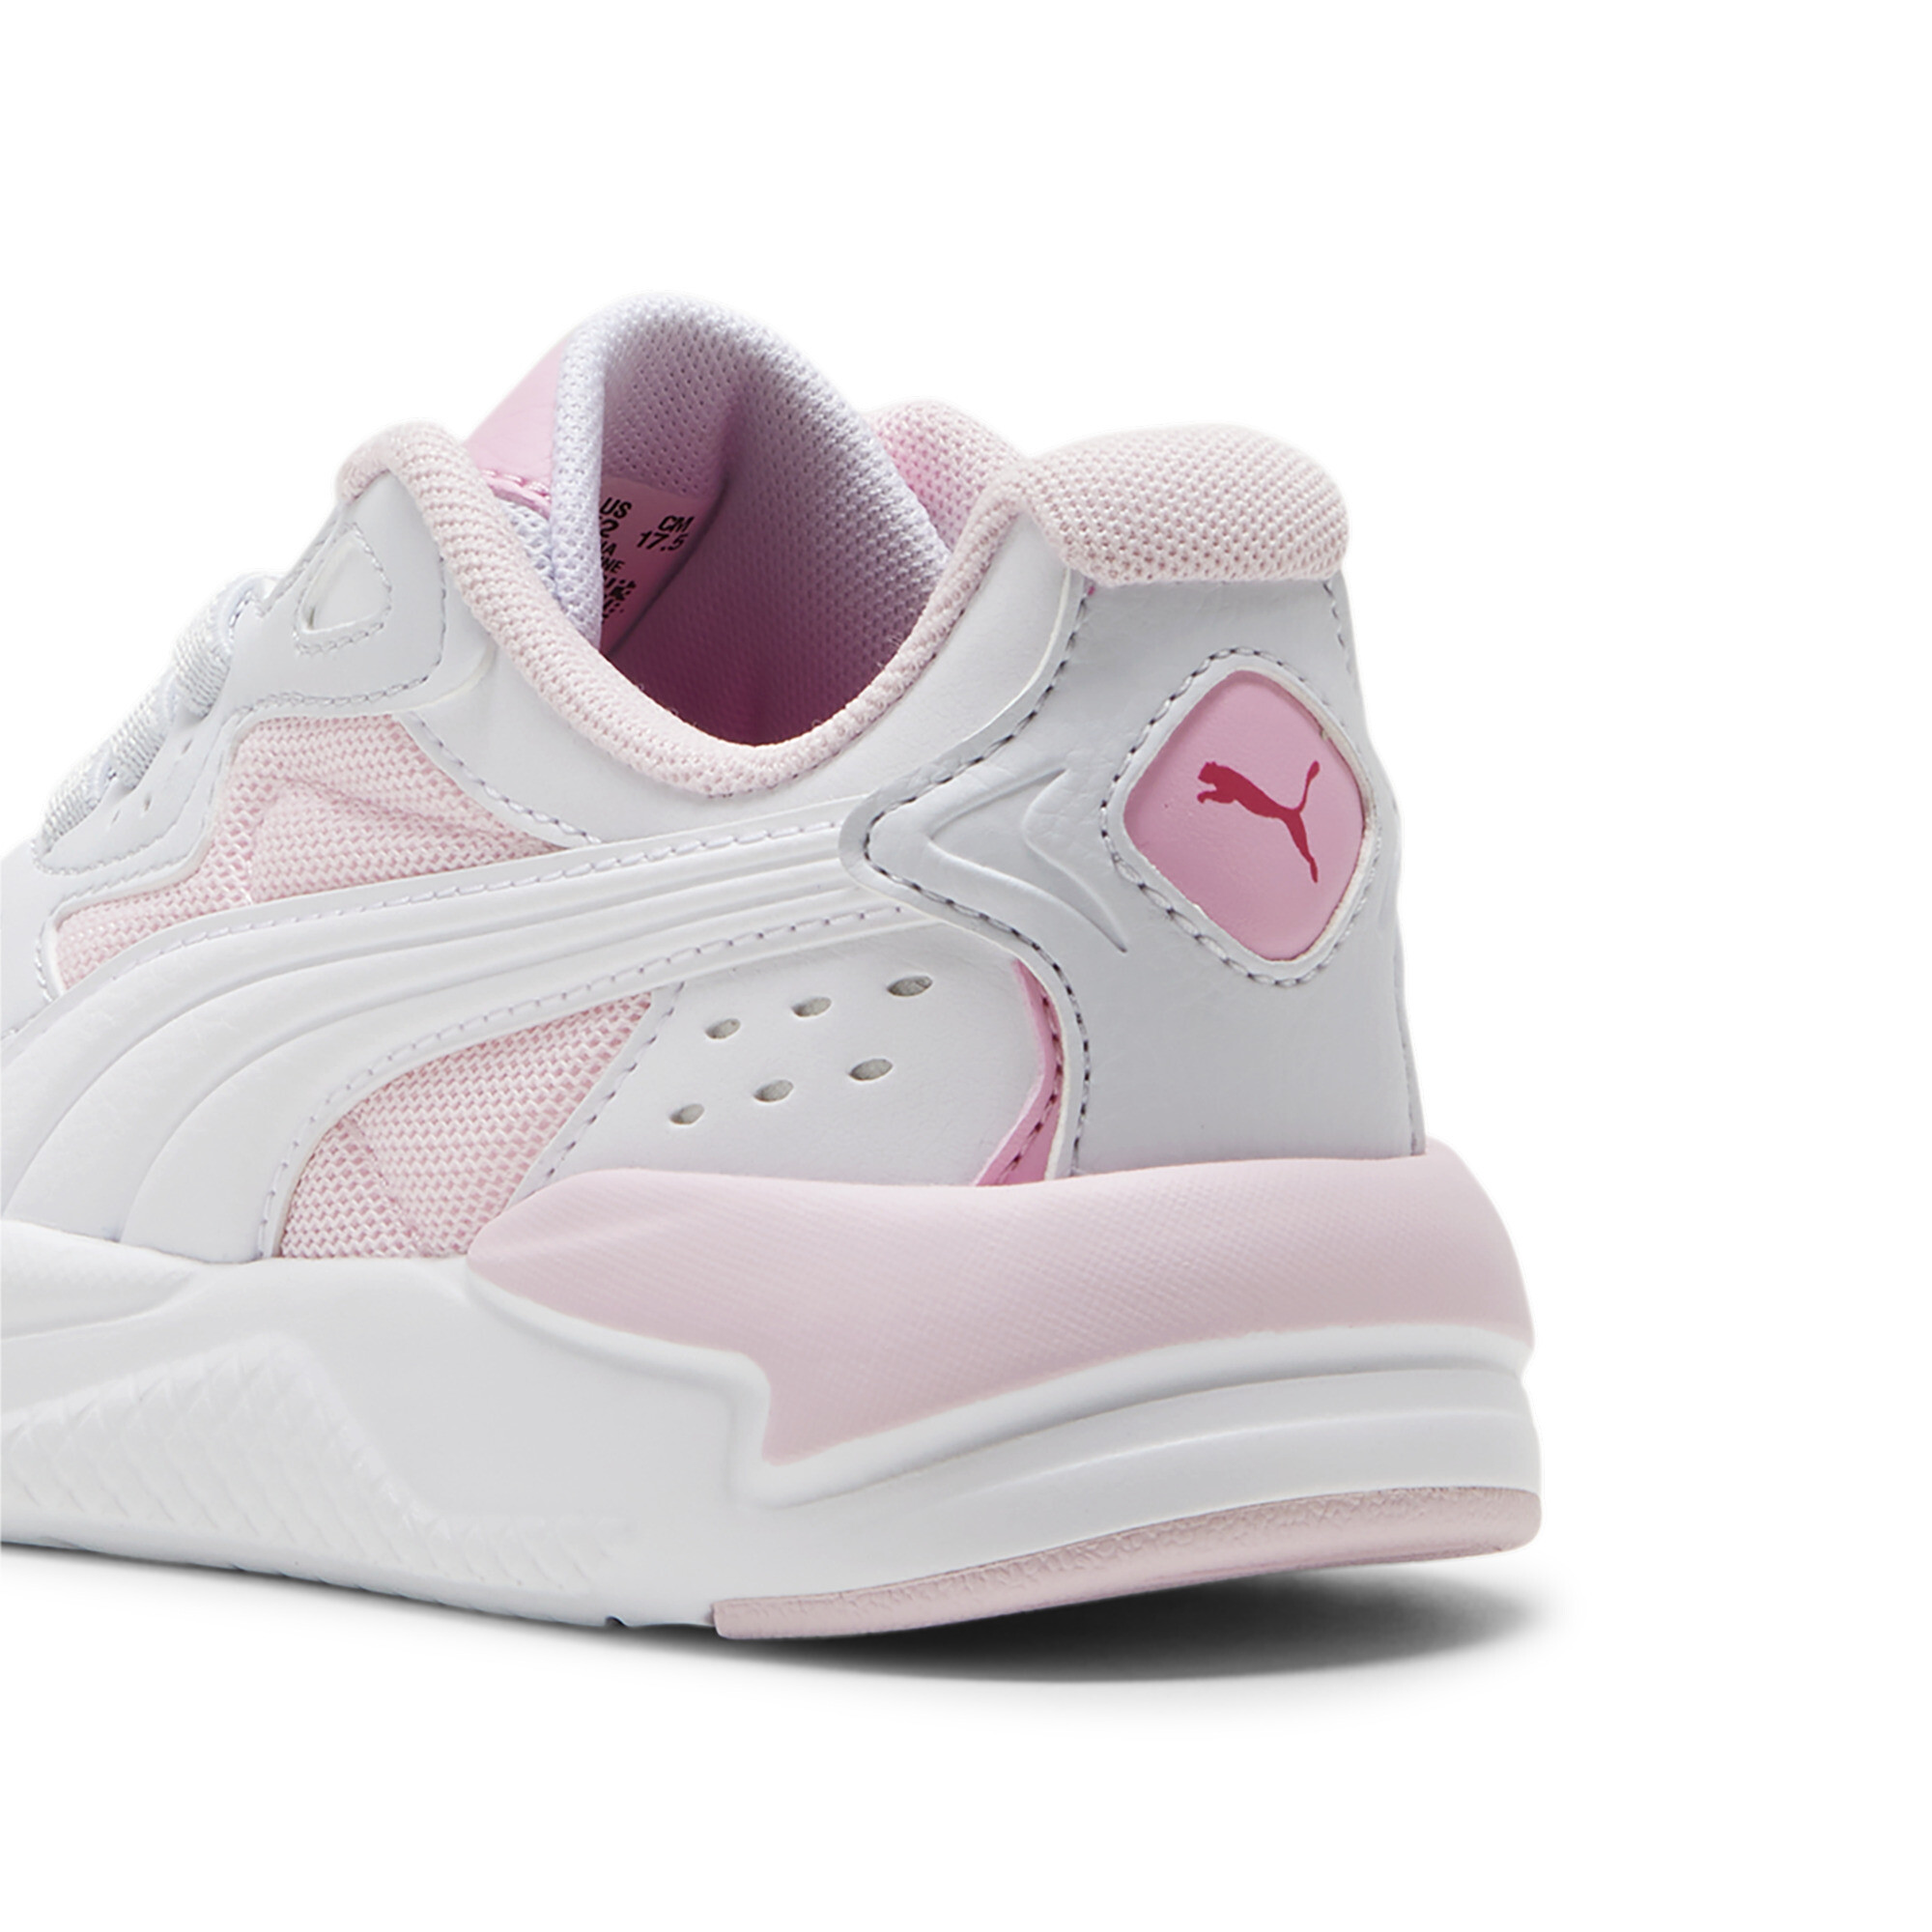 Puma X-Ray Speed AC Kids' Trainers, Pink, Size 28, Shoes